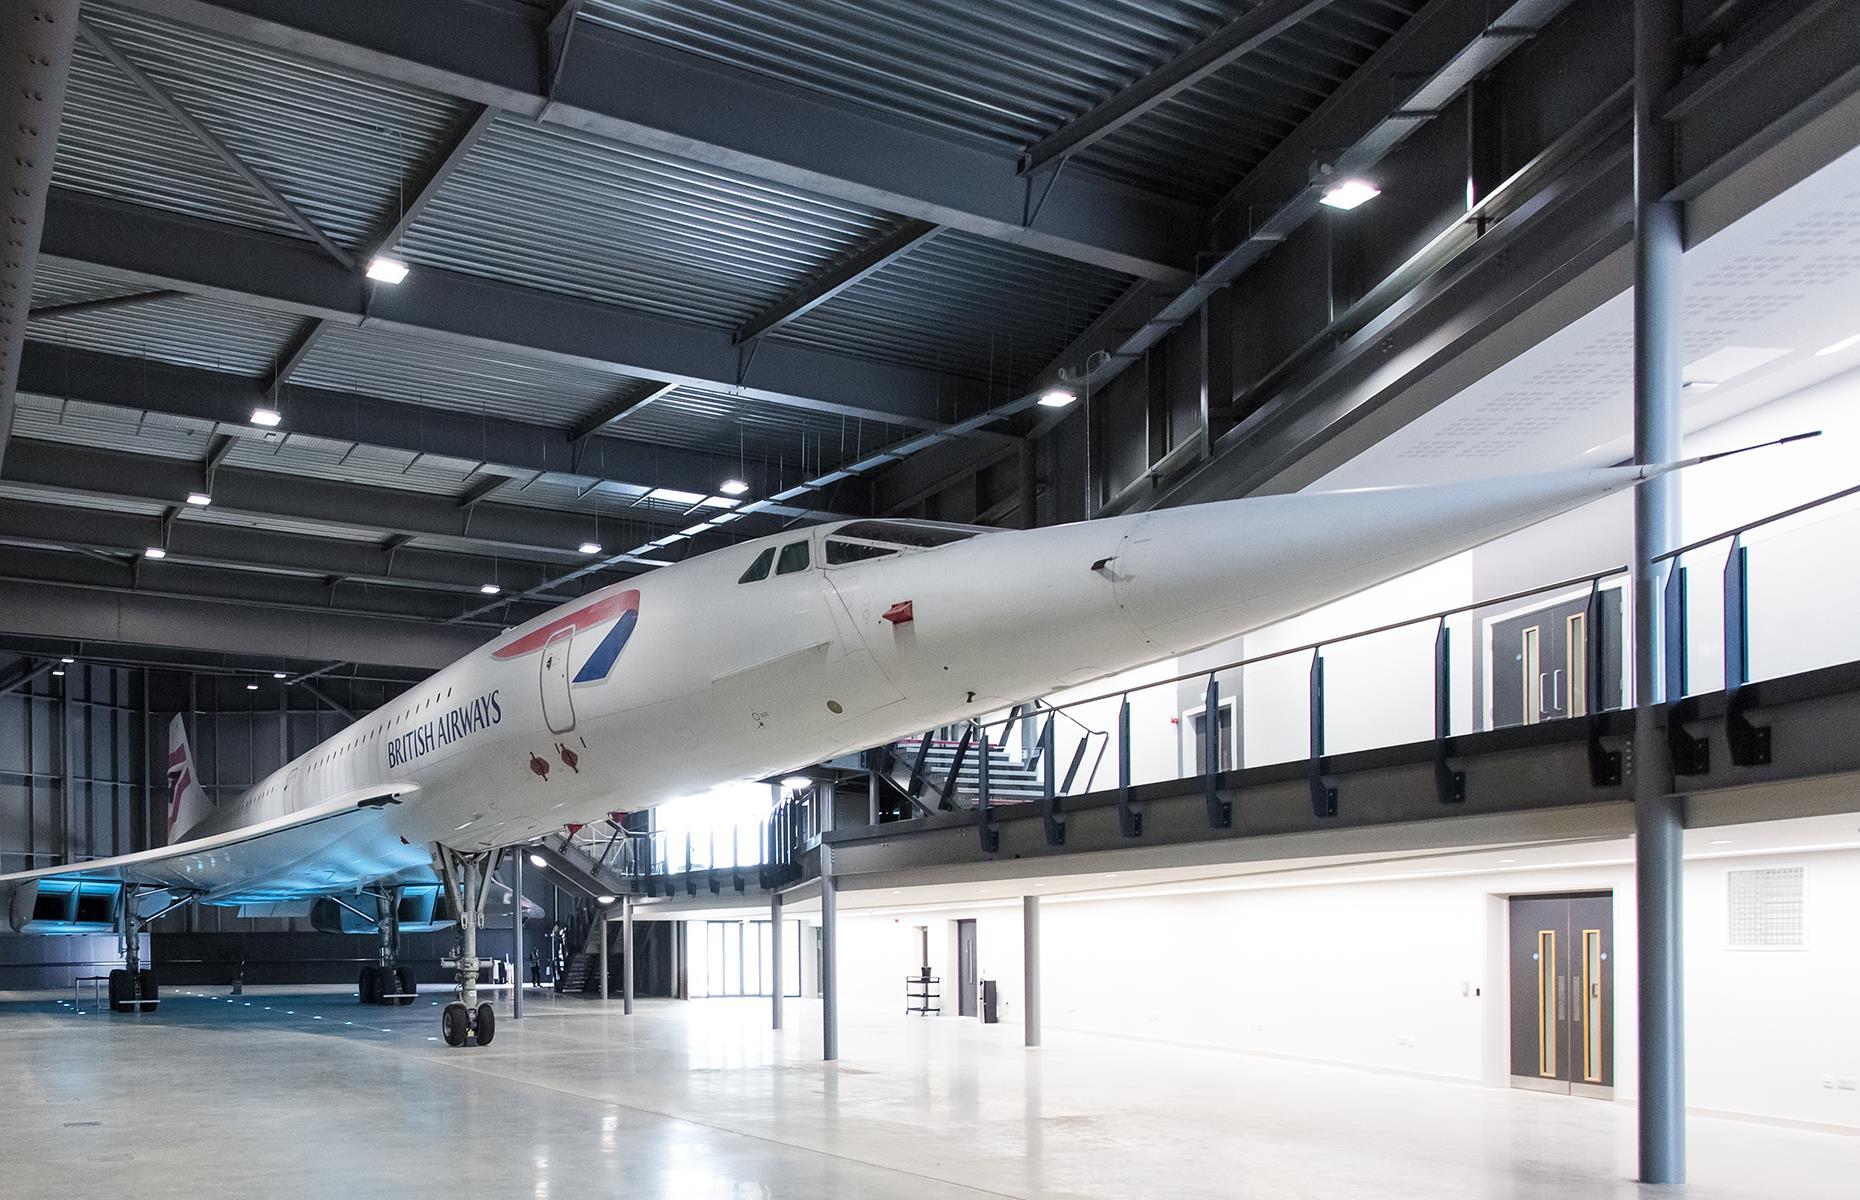 <p>Bristol is awash with aeronautical history: the supersonic passenger jet was largely developed here and all the UK Concordes made their maiden flight from the city’s runway. Aerospace Bristol, a state-of-the-art museum dedicated to Britain’s airspace heritage and innovation, opened its doors in 2017. It explores the history of aviation in Britain to the present day through a variety of interactive displays and exhibits including planes, helicopters and satellites. The centrepiece of Aerospace Bristol is the Concorde Alpha Foxtrot, the last supersonic jet to ever be built and the last to fly in 2003.</p>